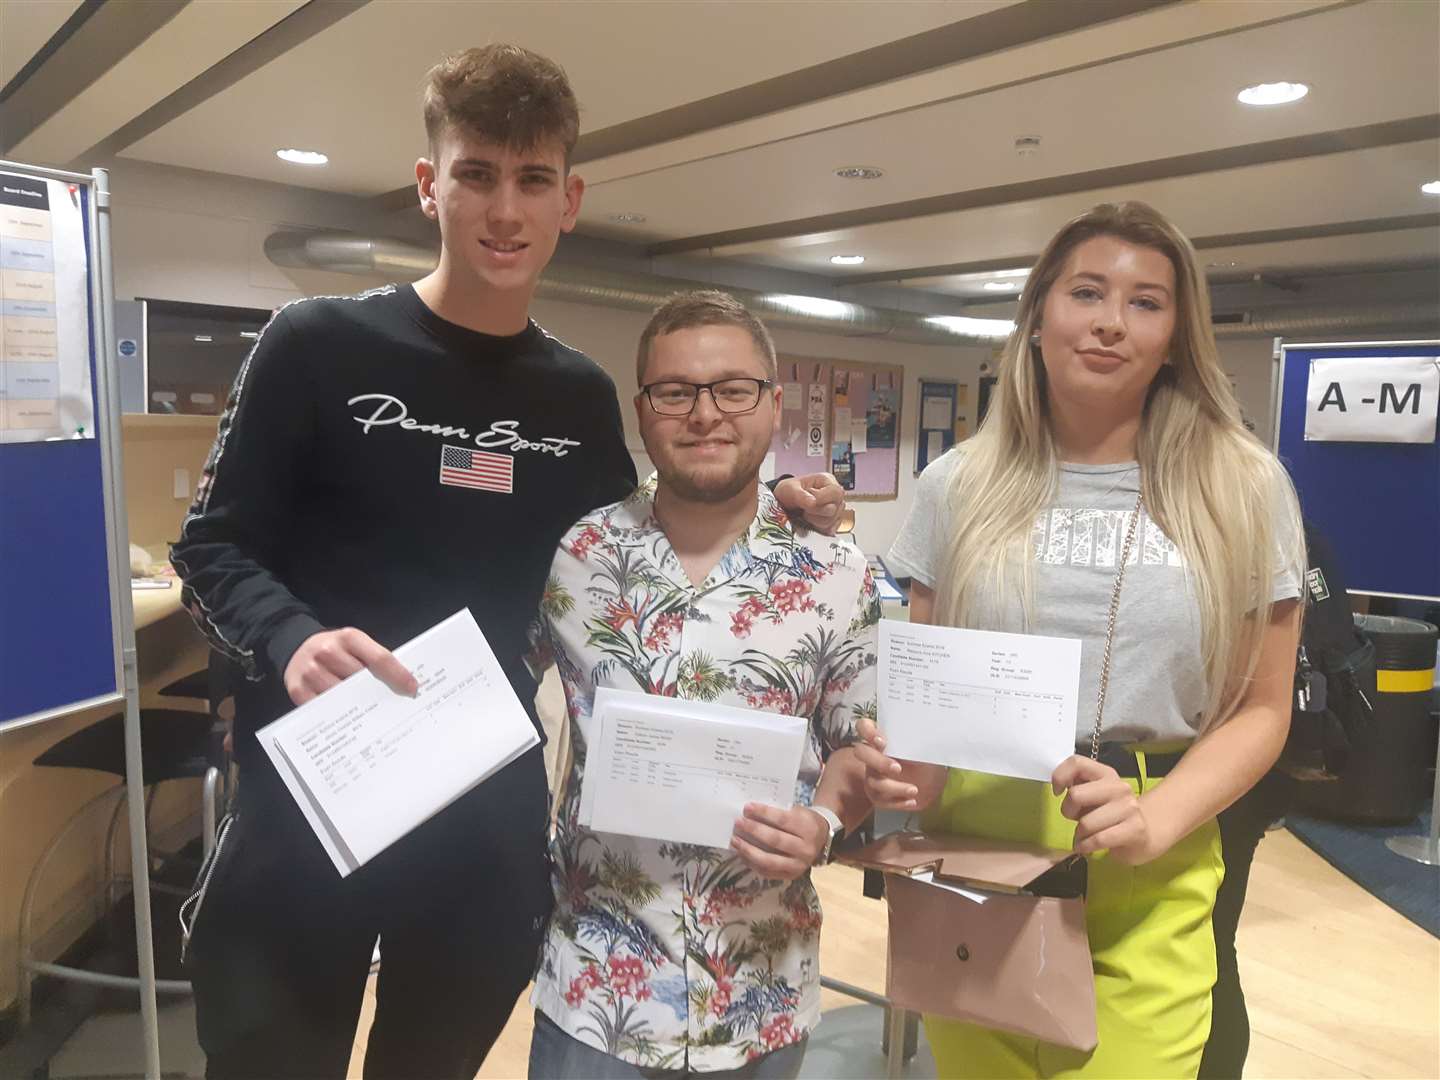 James Finch, Callum Beer and Rebecca Kitchen of Thomas Aveling School picking up their A-level results (15276209)